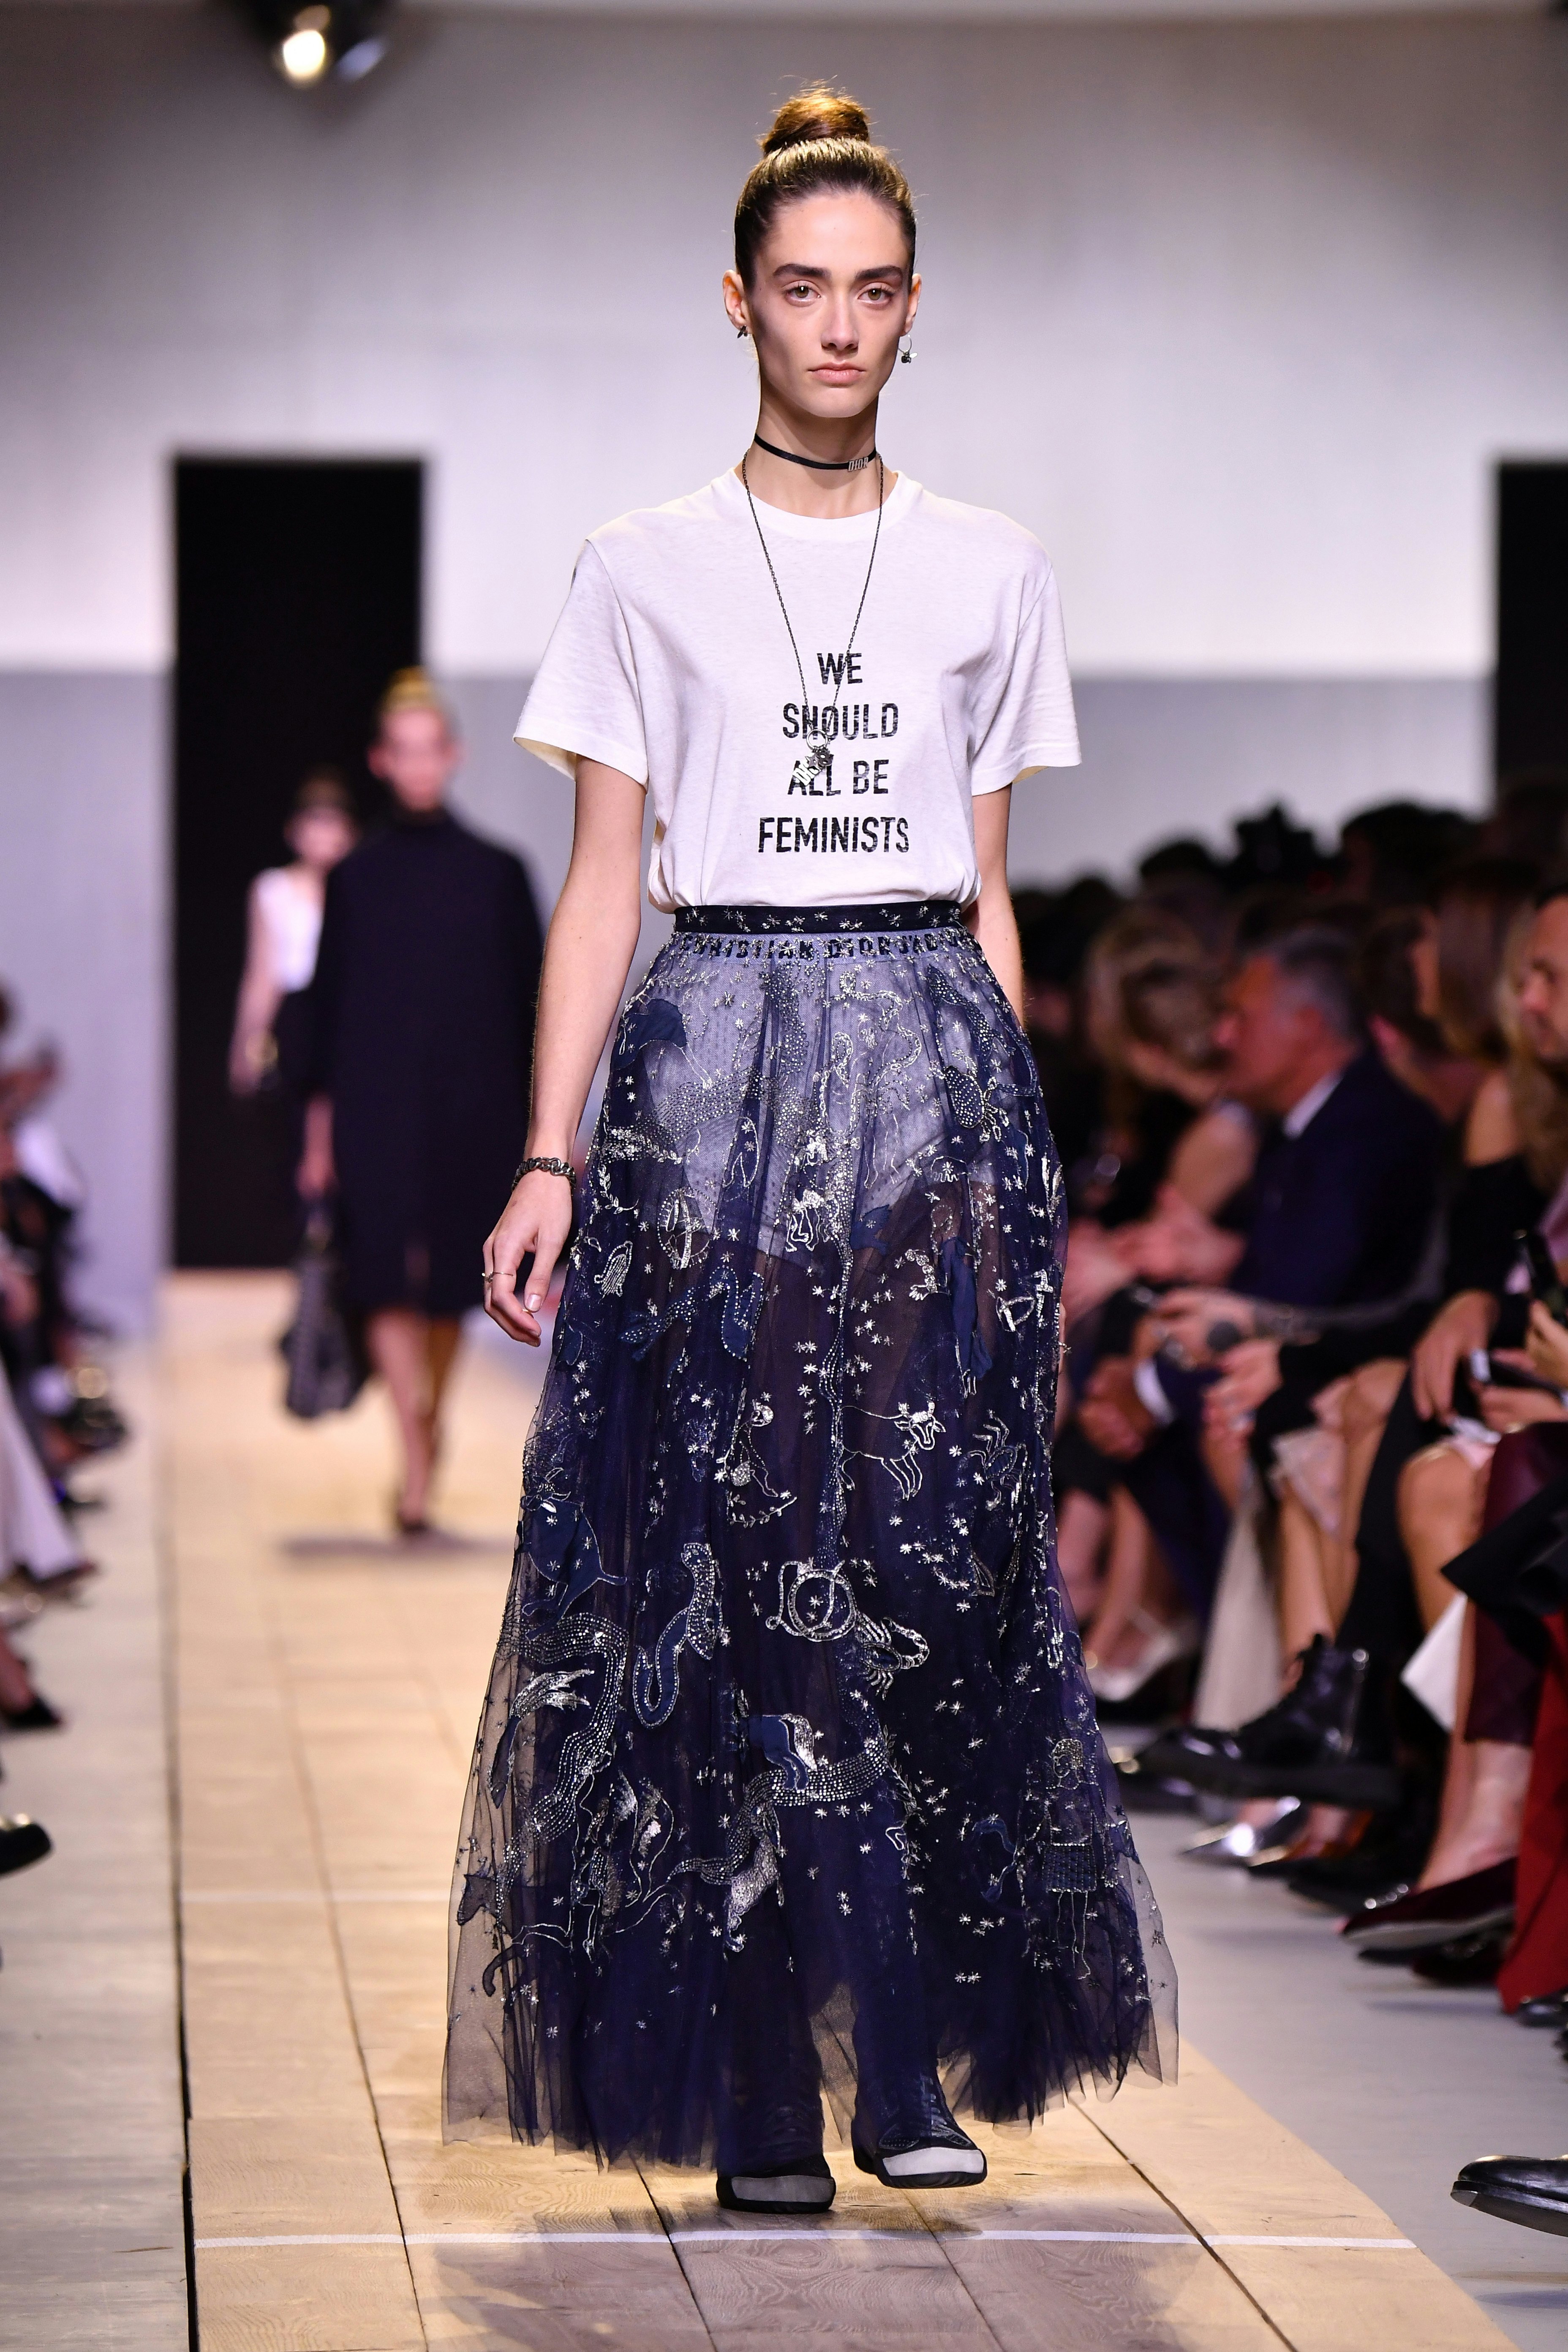 we all should be feminist t shirt dior